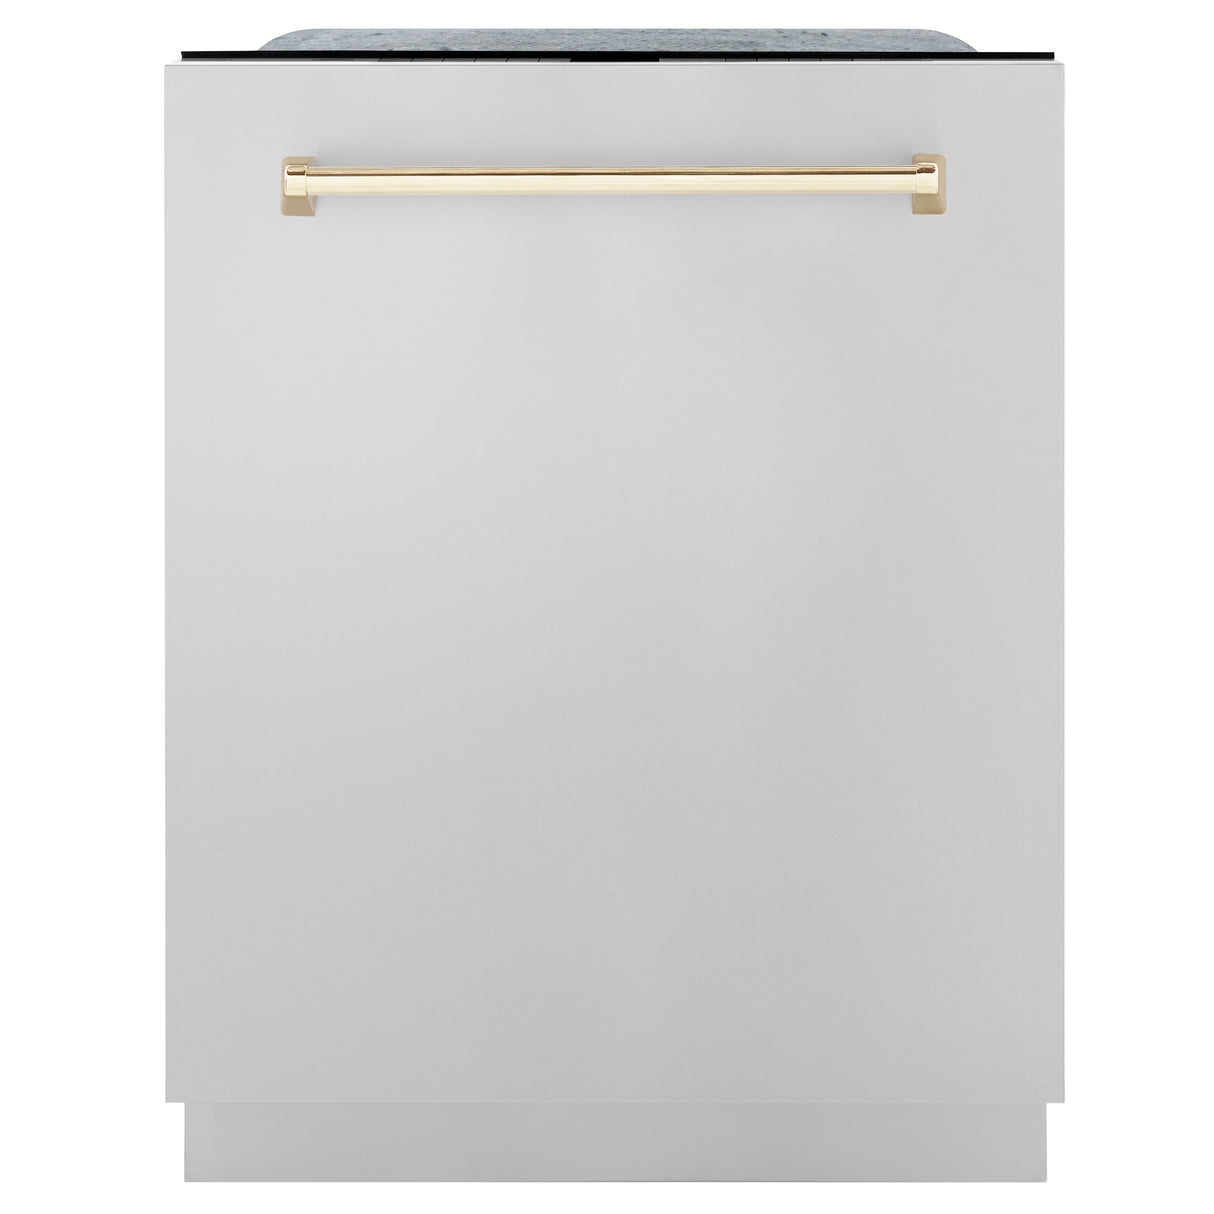 ZLINE Autograph Edition 48 in. Kitchen Package with Stainless Steel Dual Fuel Range, Range Hood, Dishwasher and Refrigeration with Polished Gold Accents (4KAPR-RARHDWM48-G)